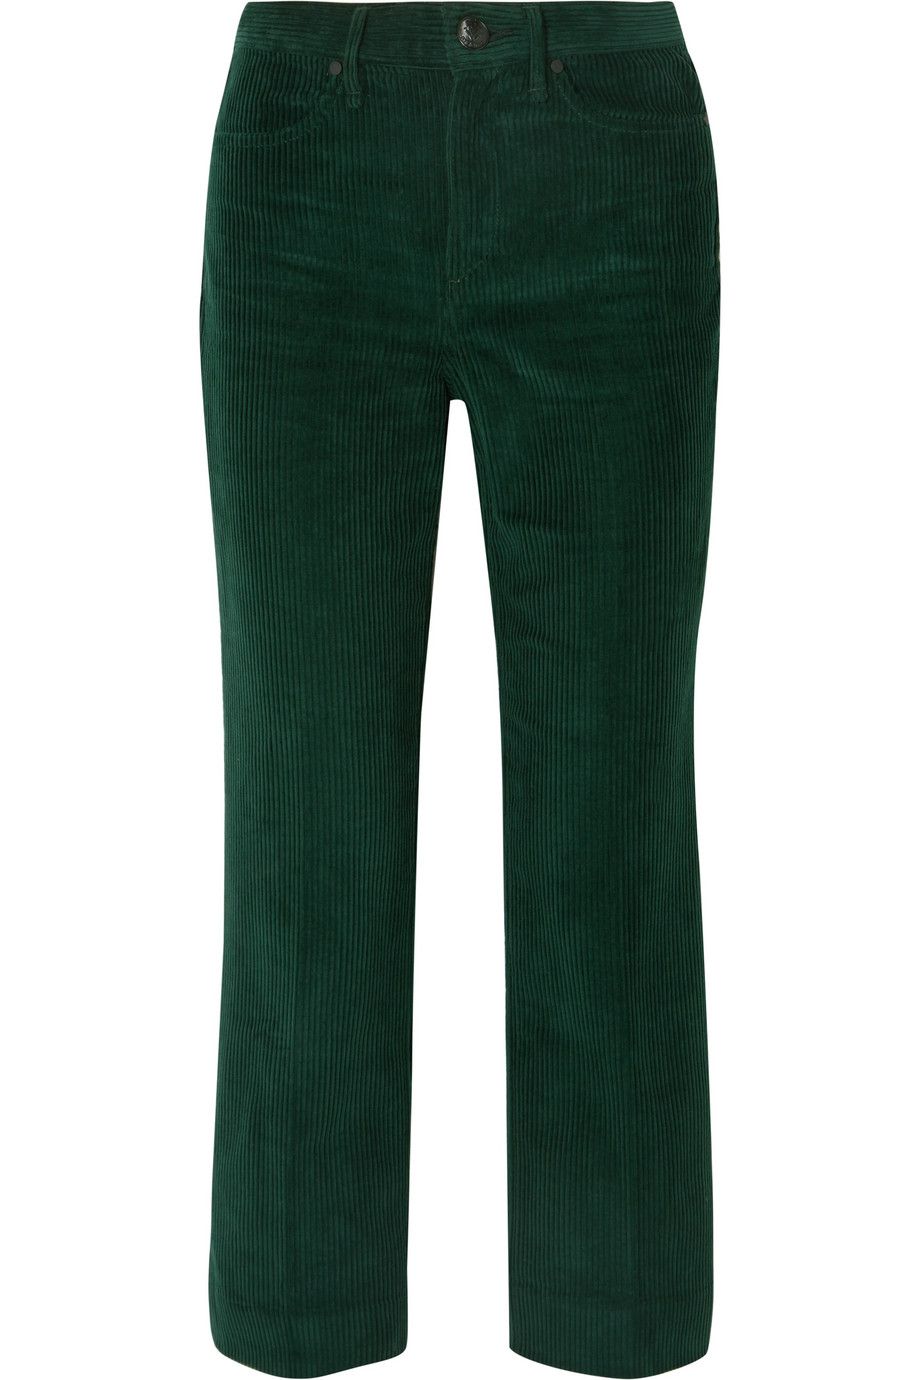 The Statement Trousers: Rag & Bone Dylan Corduroy Flared Pants